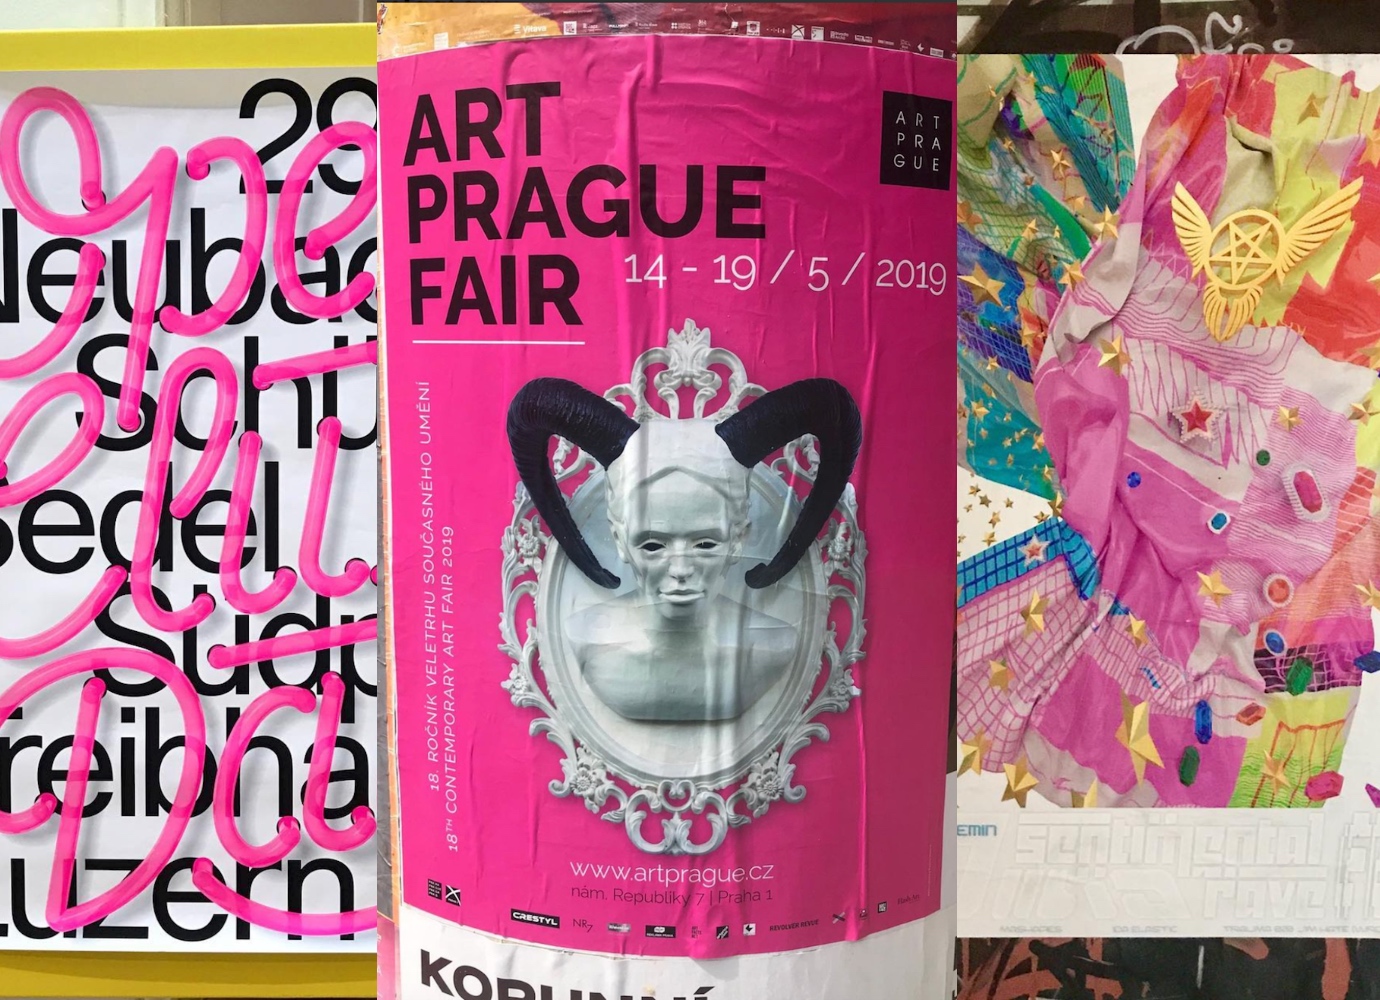 Browse through the colourful posters of Prague with this Insta account